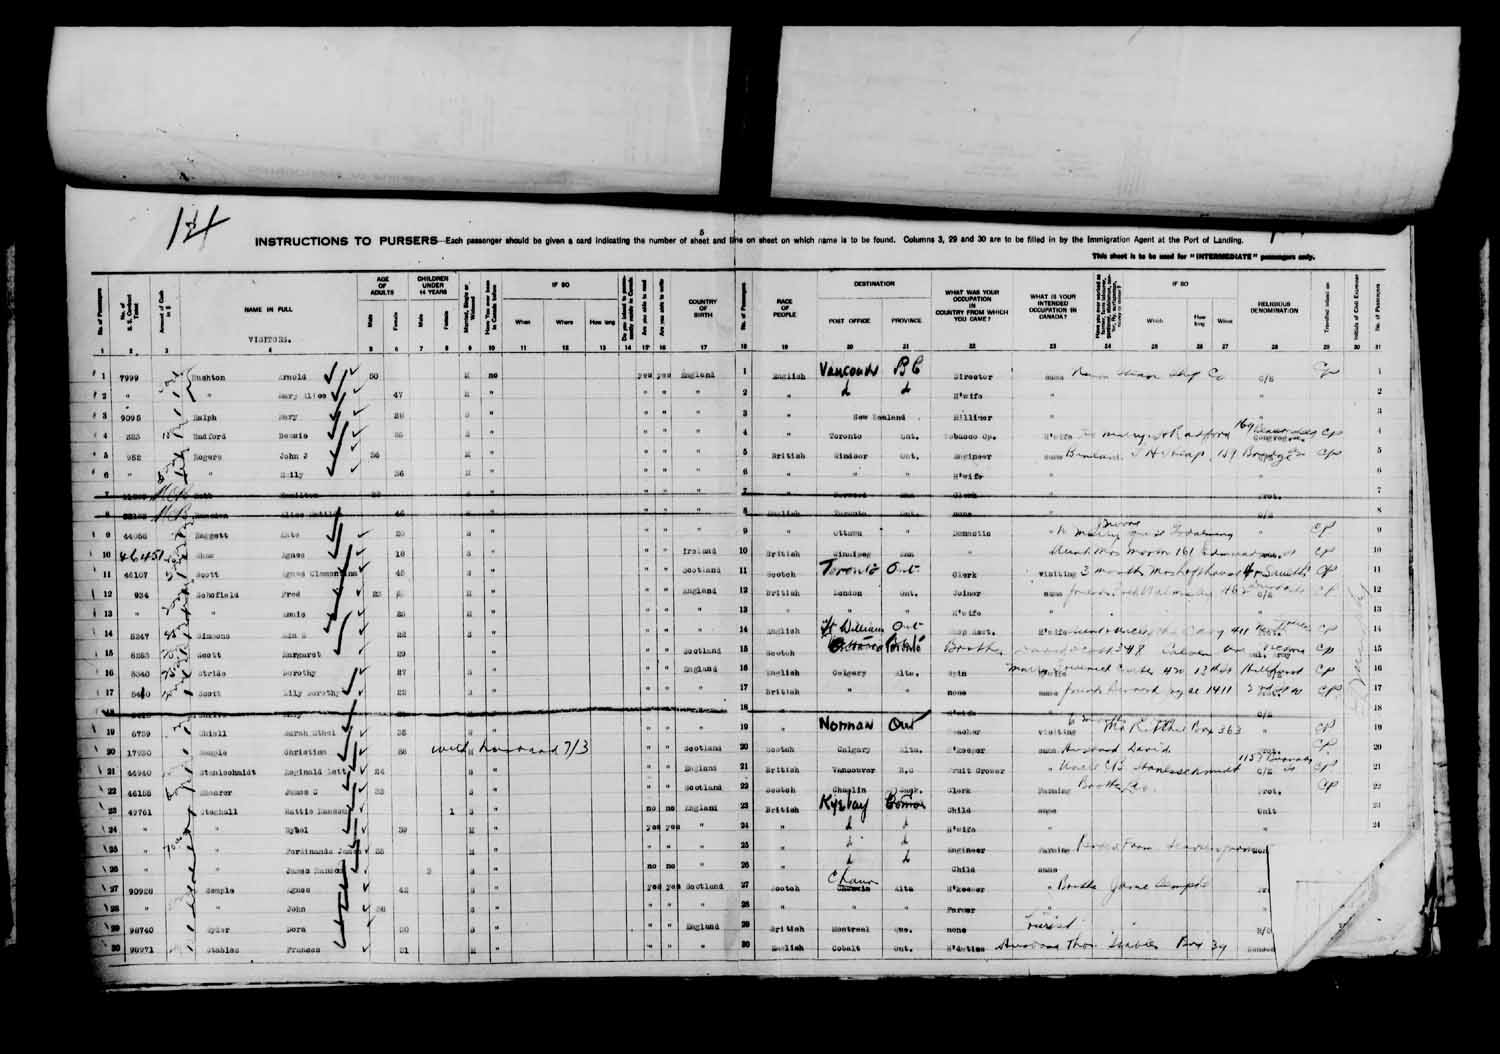 Digitized page of Passenger Lists for Image No.: e003610621